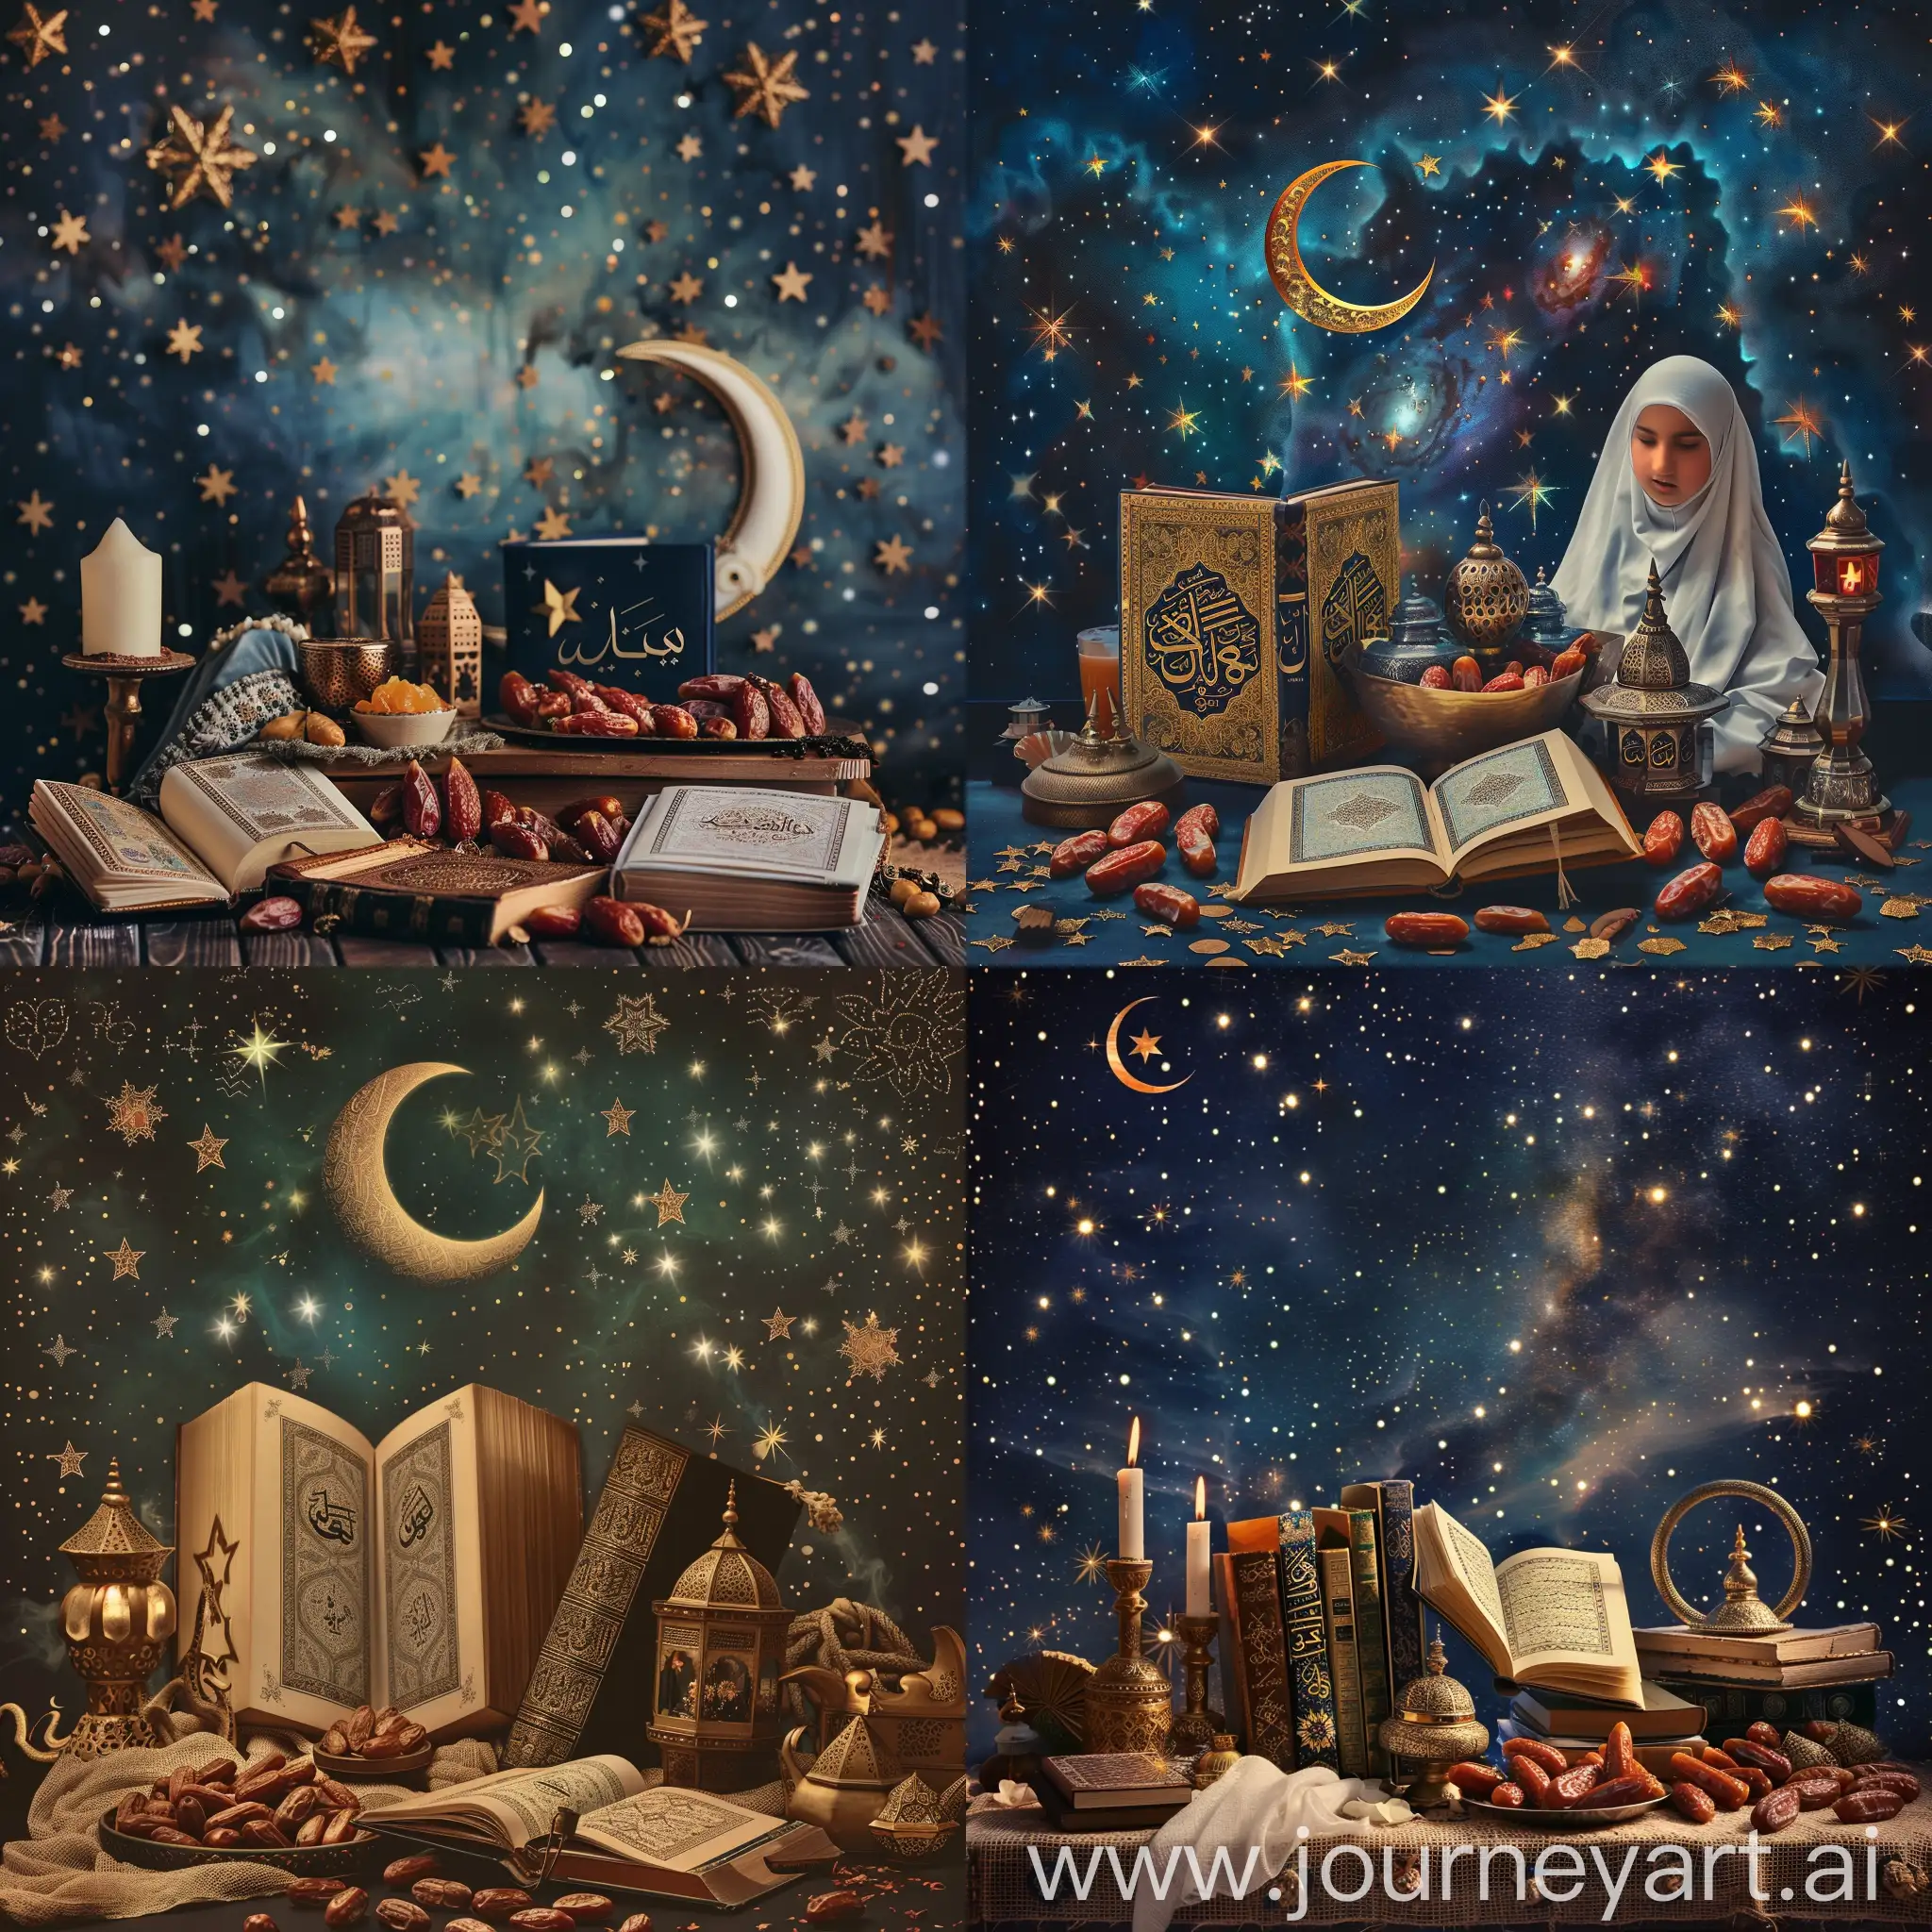 Create an image to wish Ramadan with beautiful starry and crescent background and dates, Quran and other islamic items in the front 